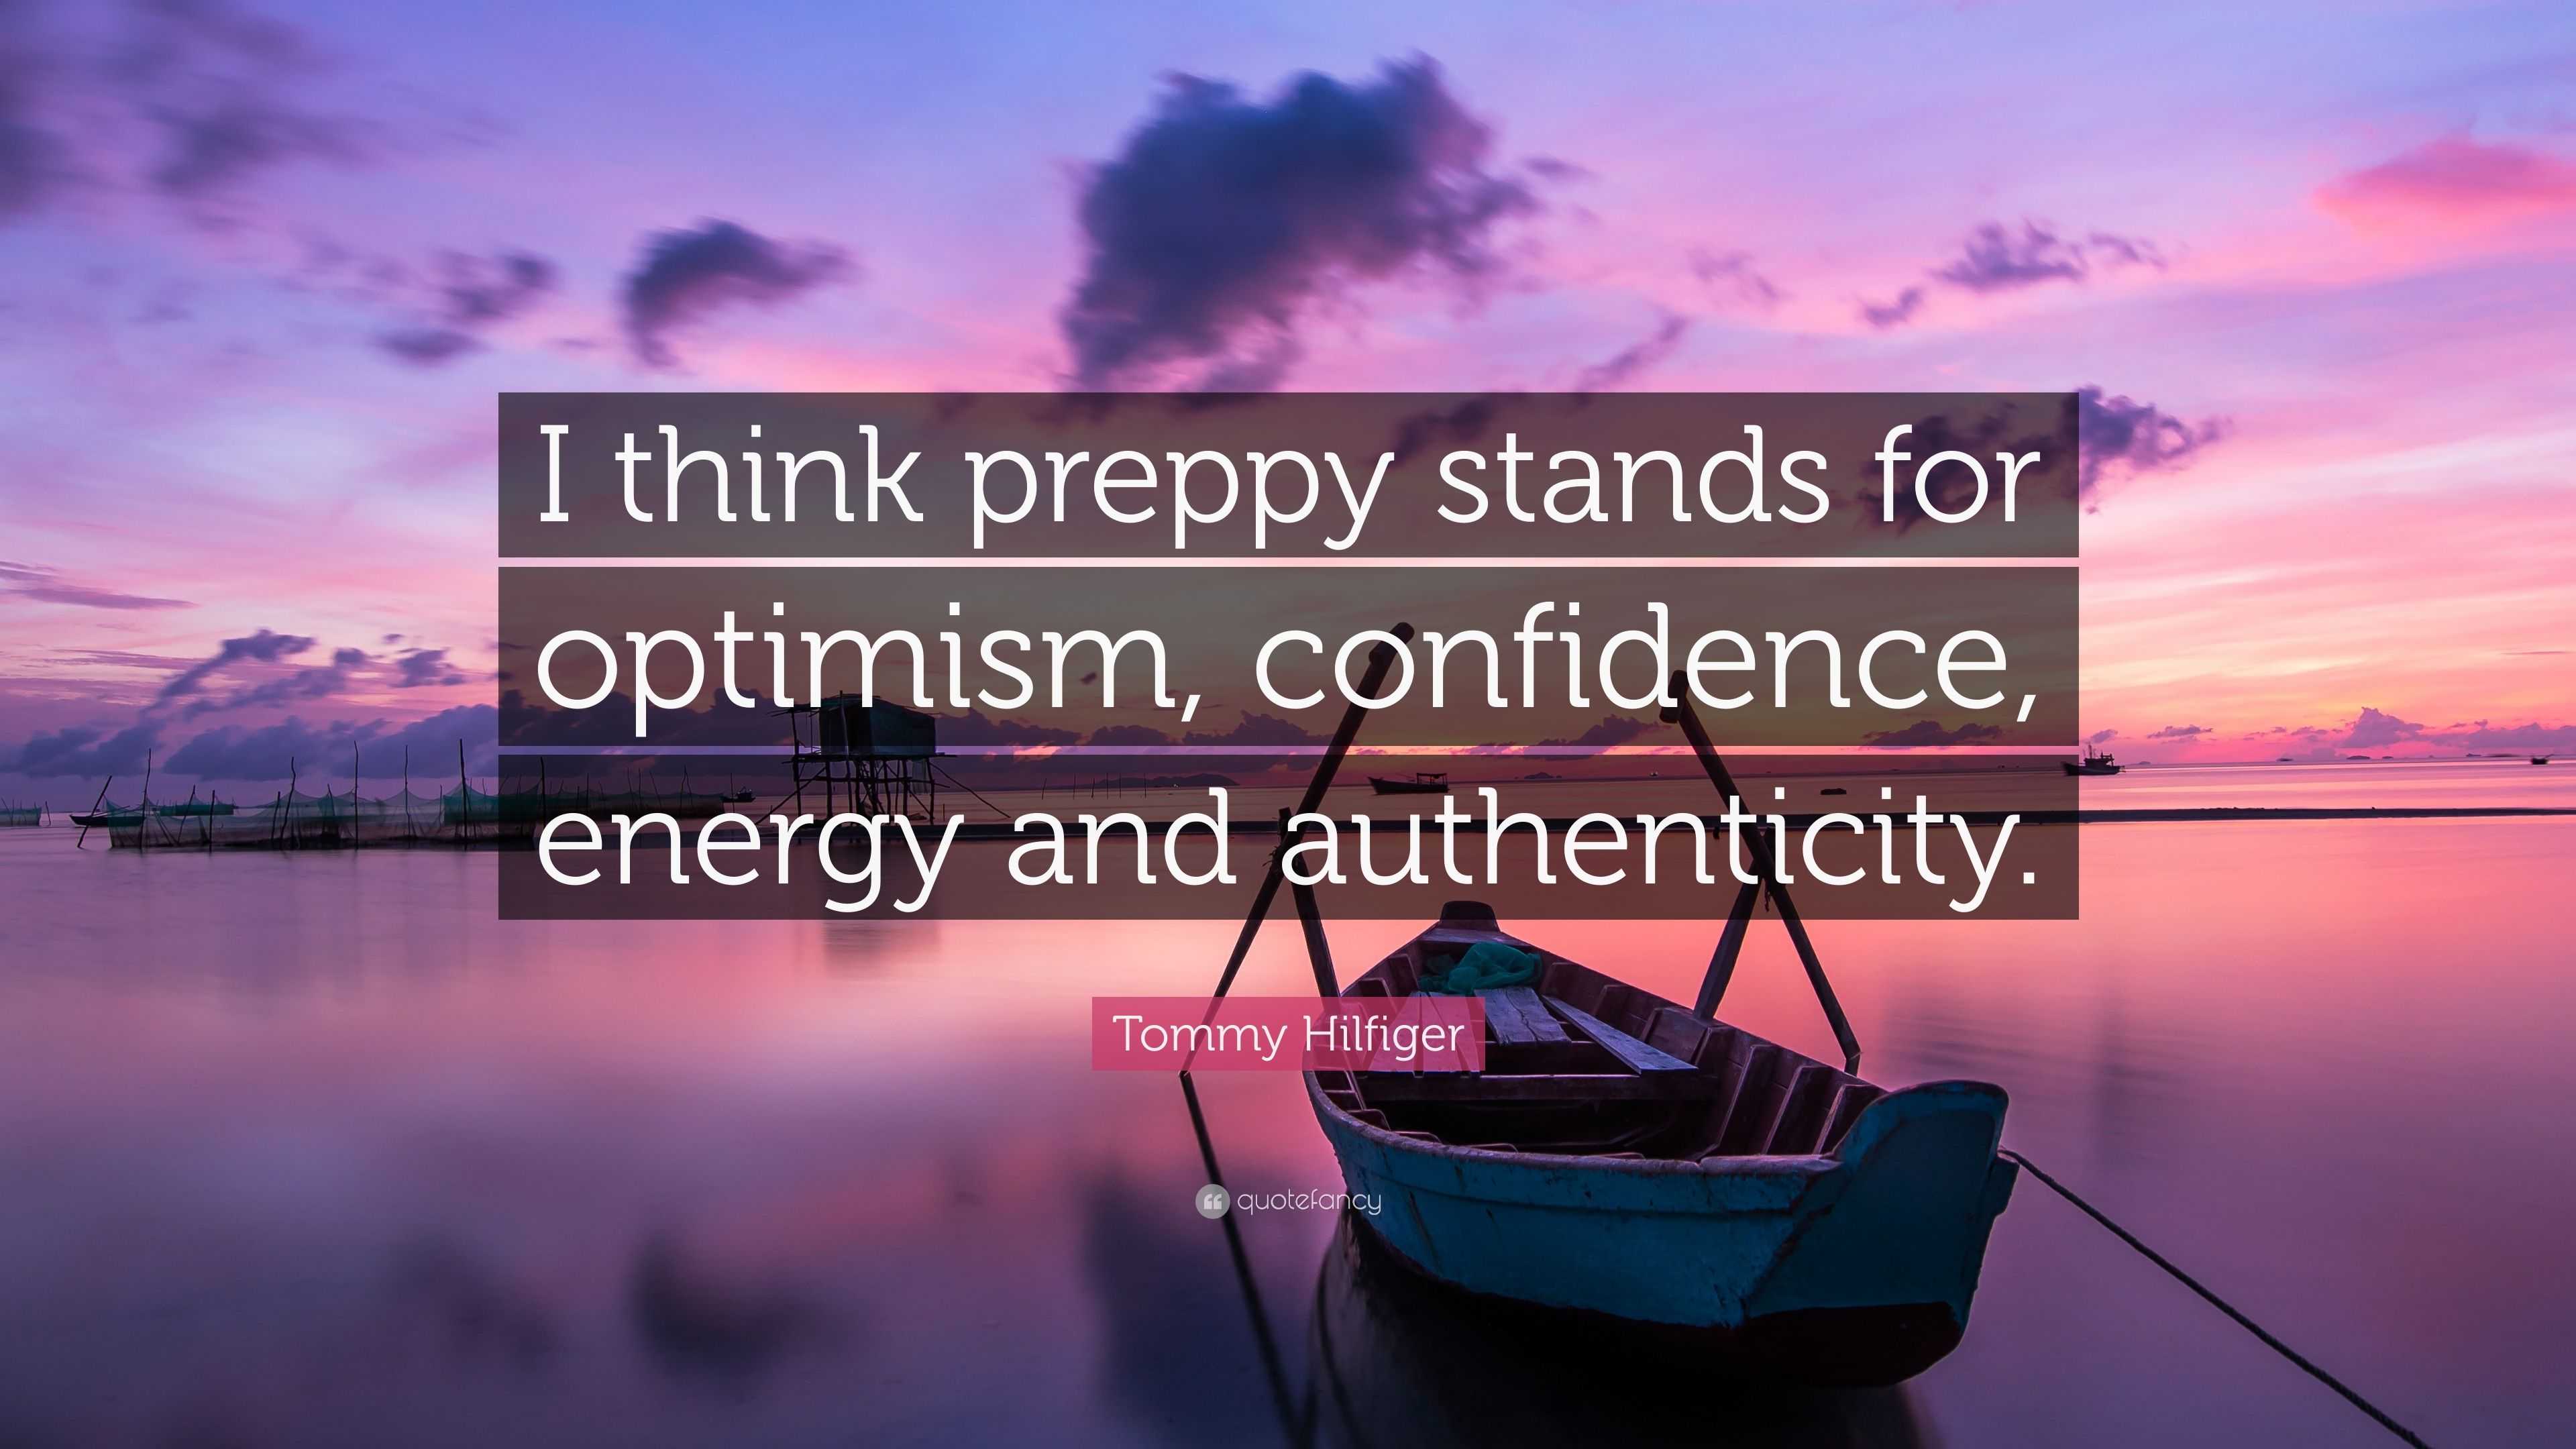 Tommy Hilfiger Quote: “I think preppy stands for optimism